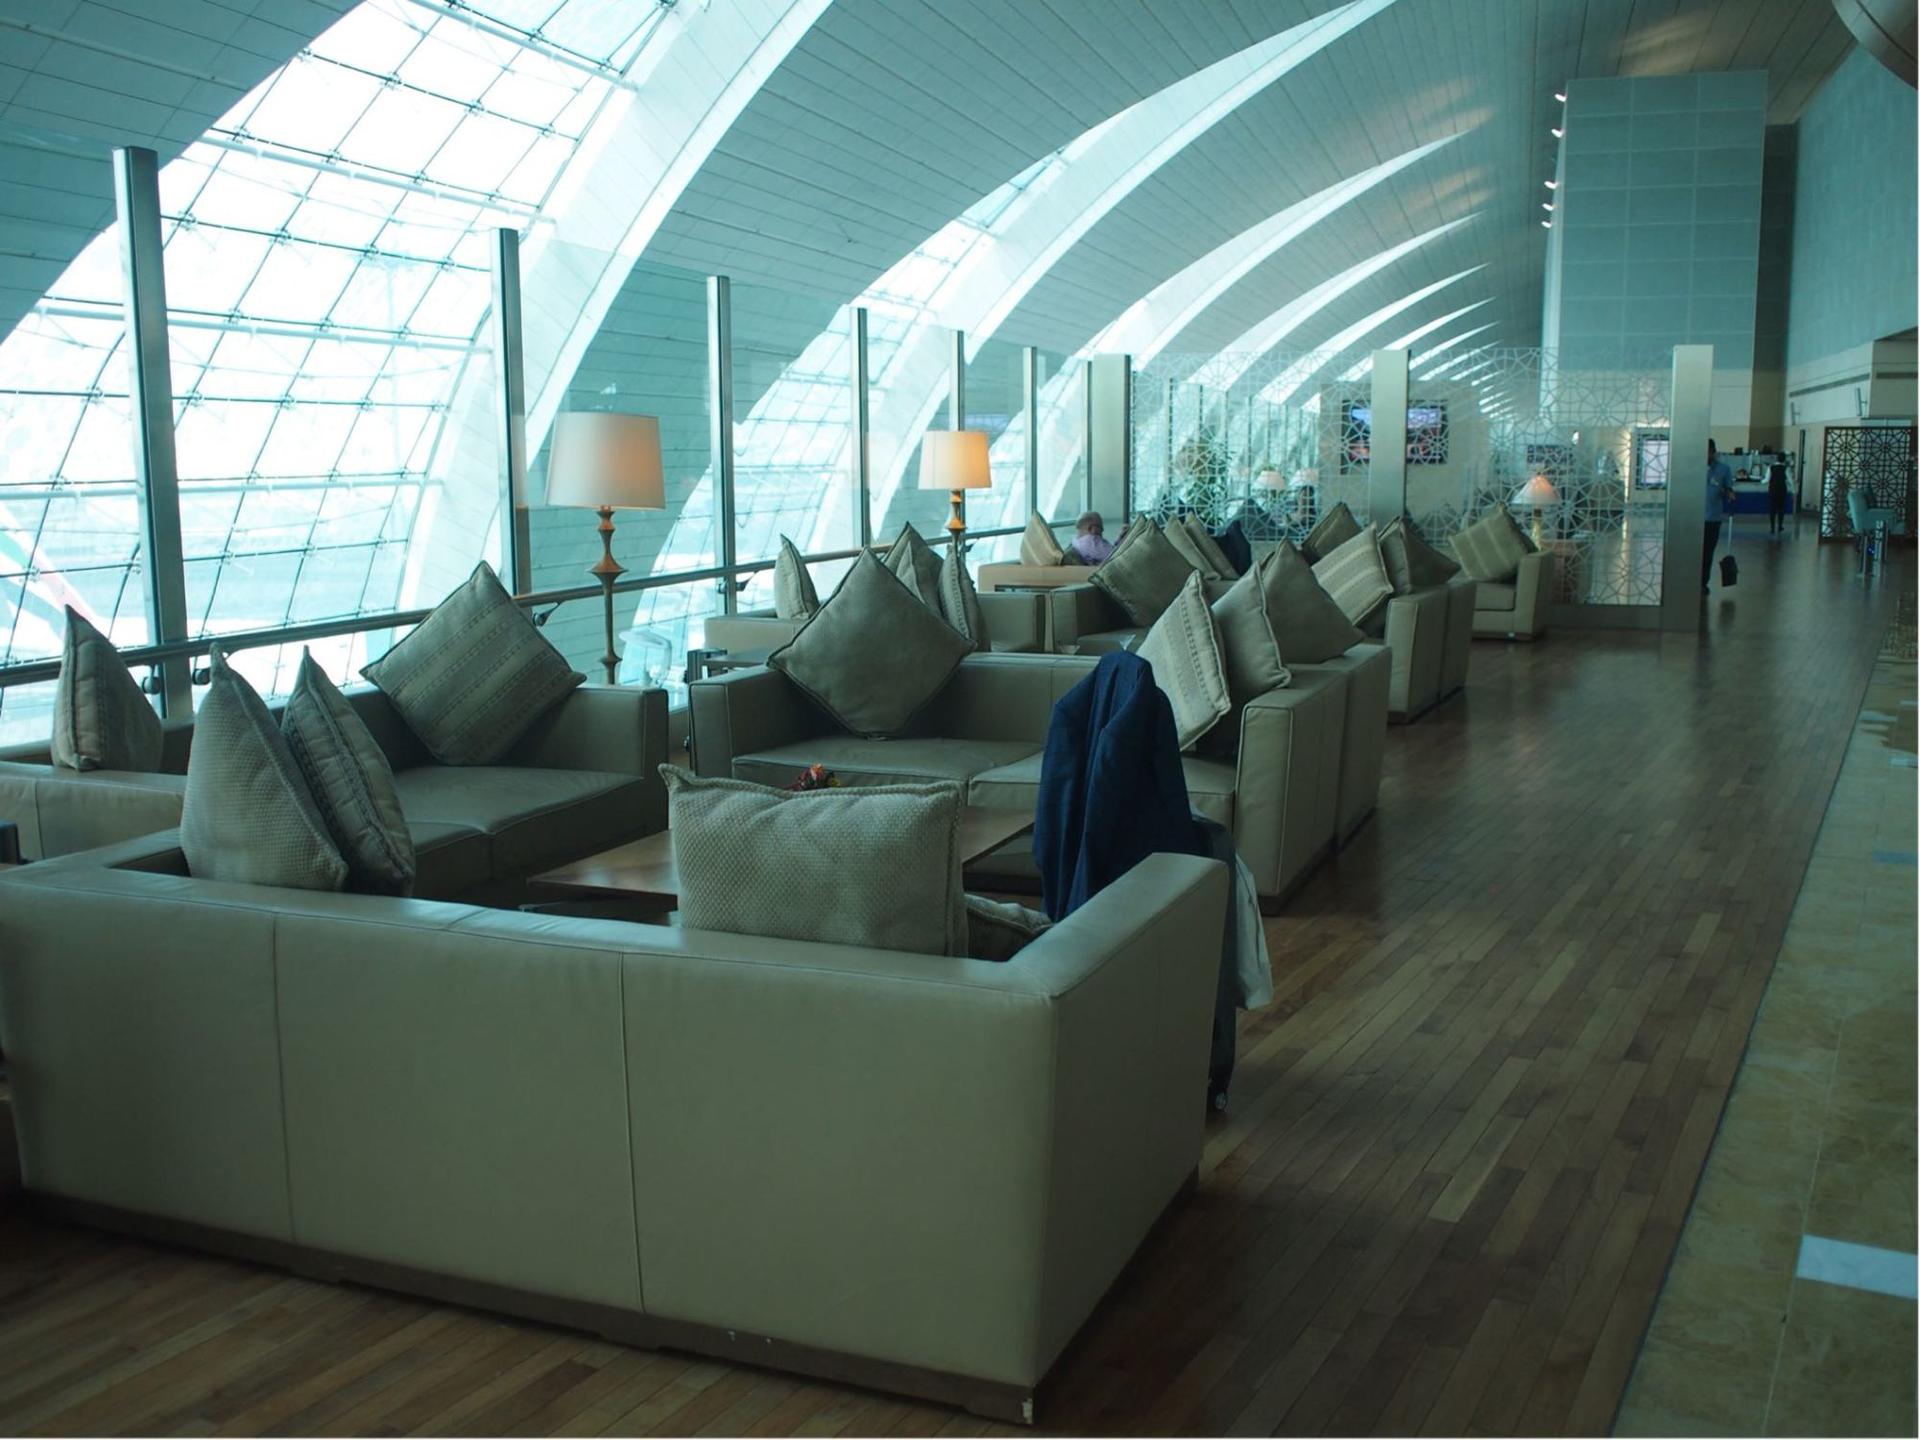 Emirates First Class Lounge image 17 of 25